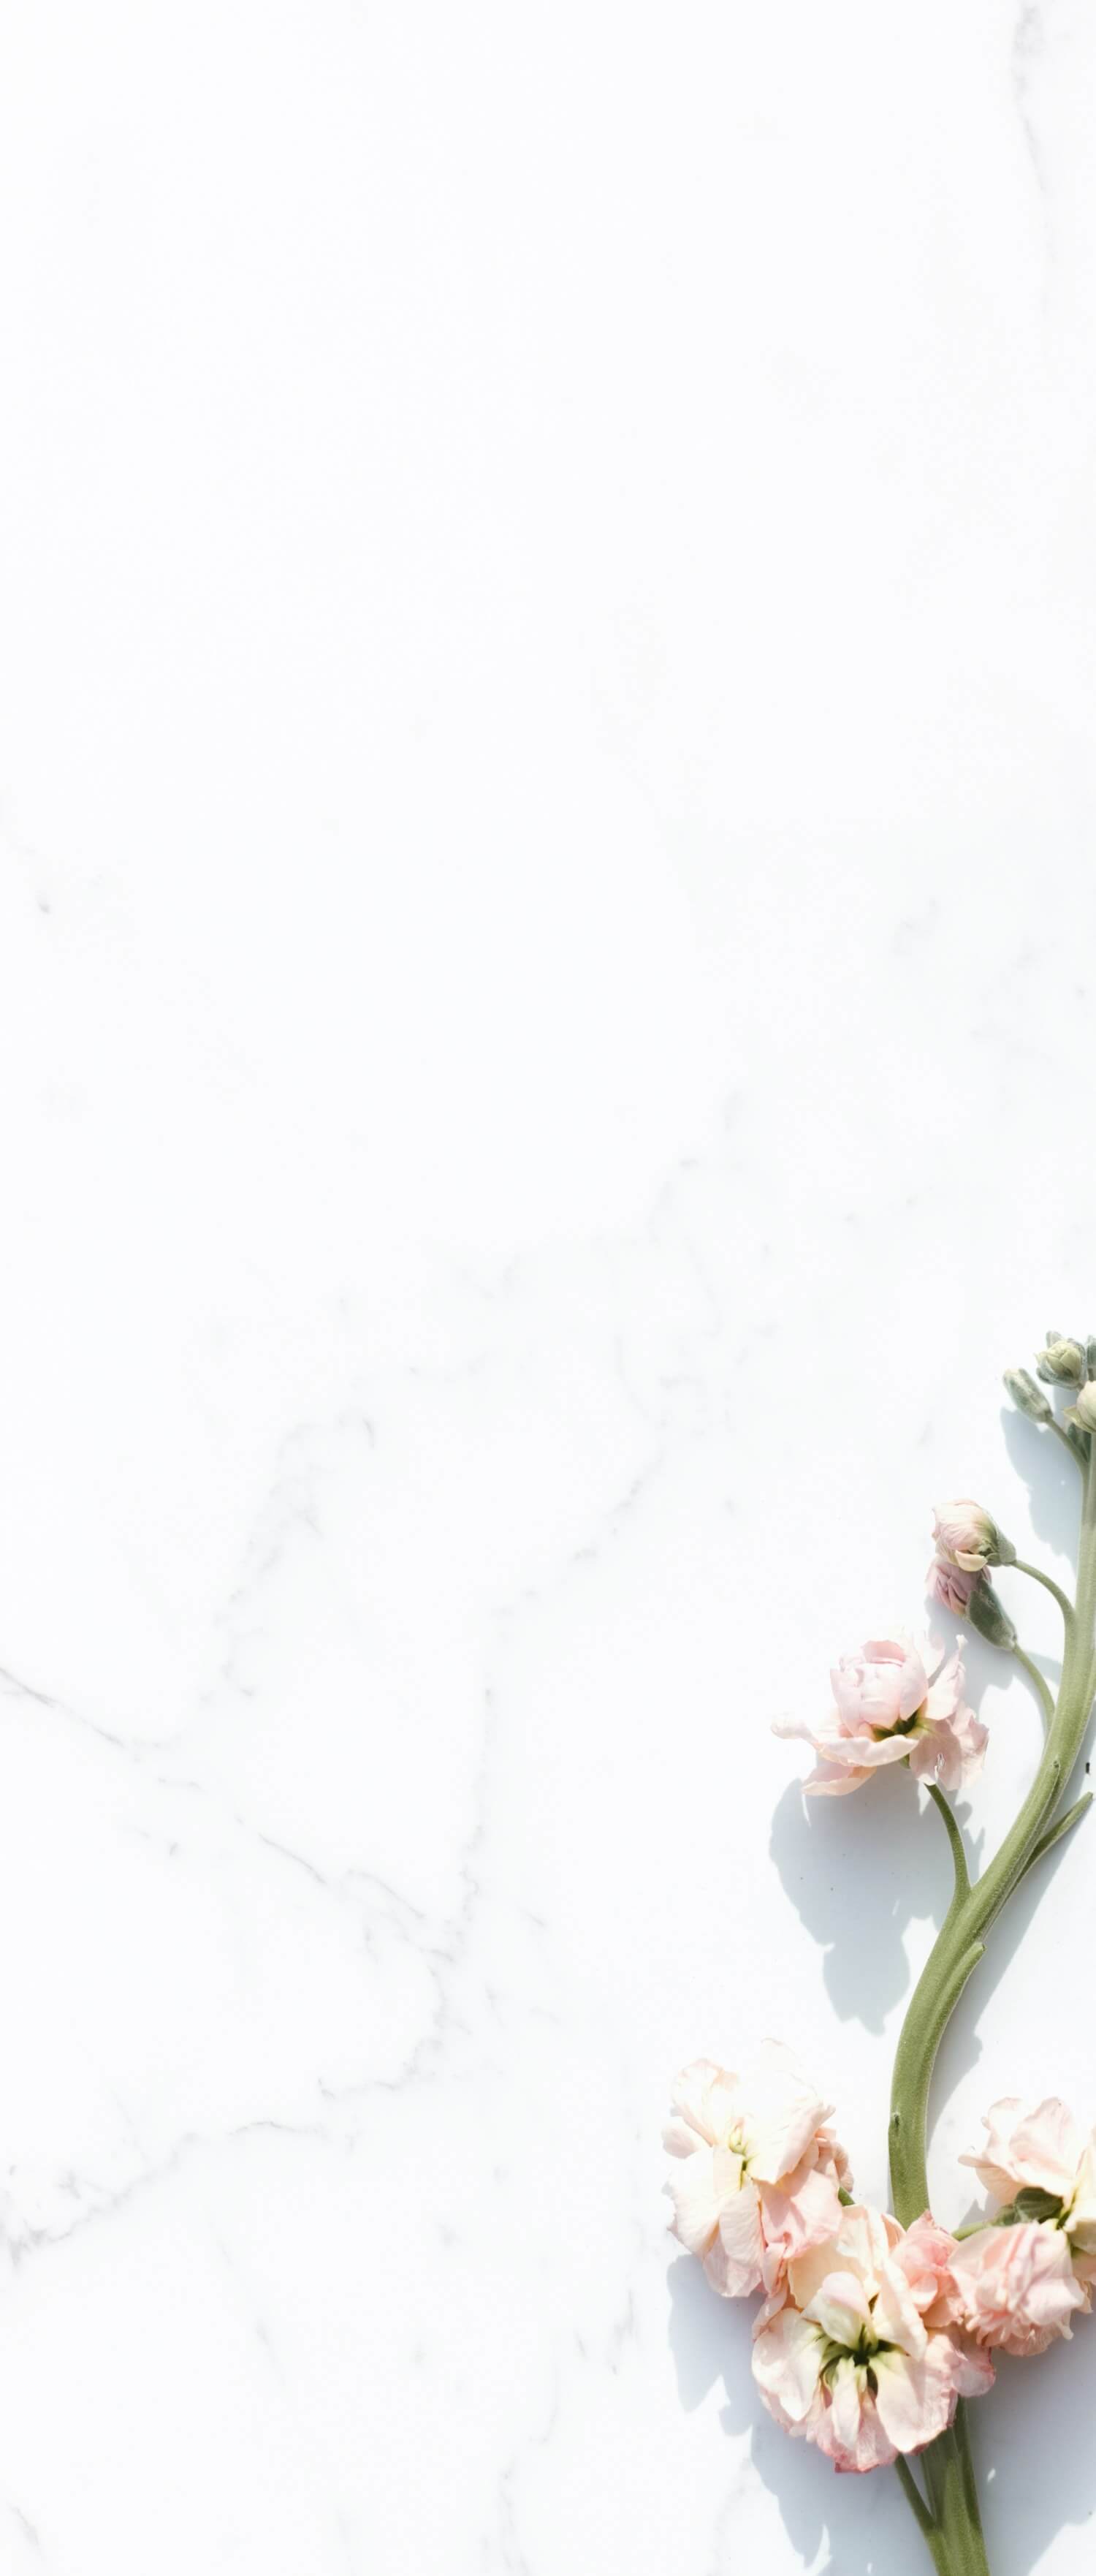 Marble and flowers background